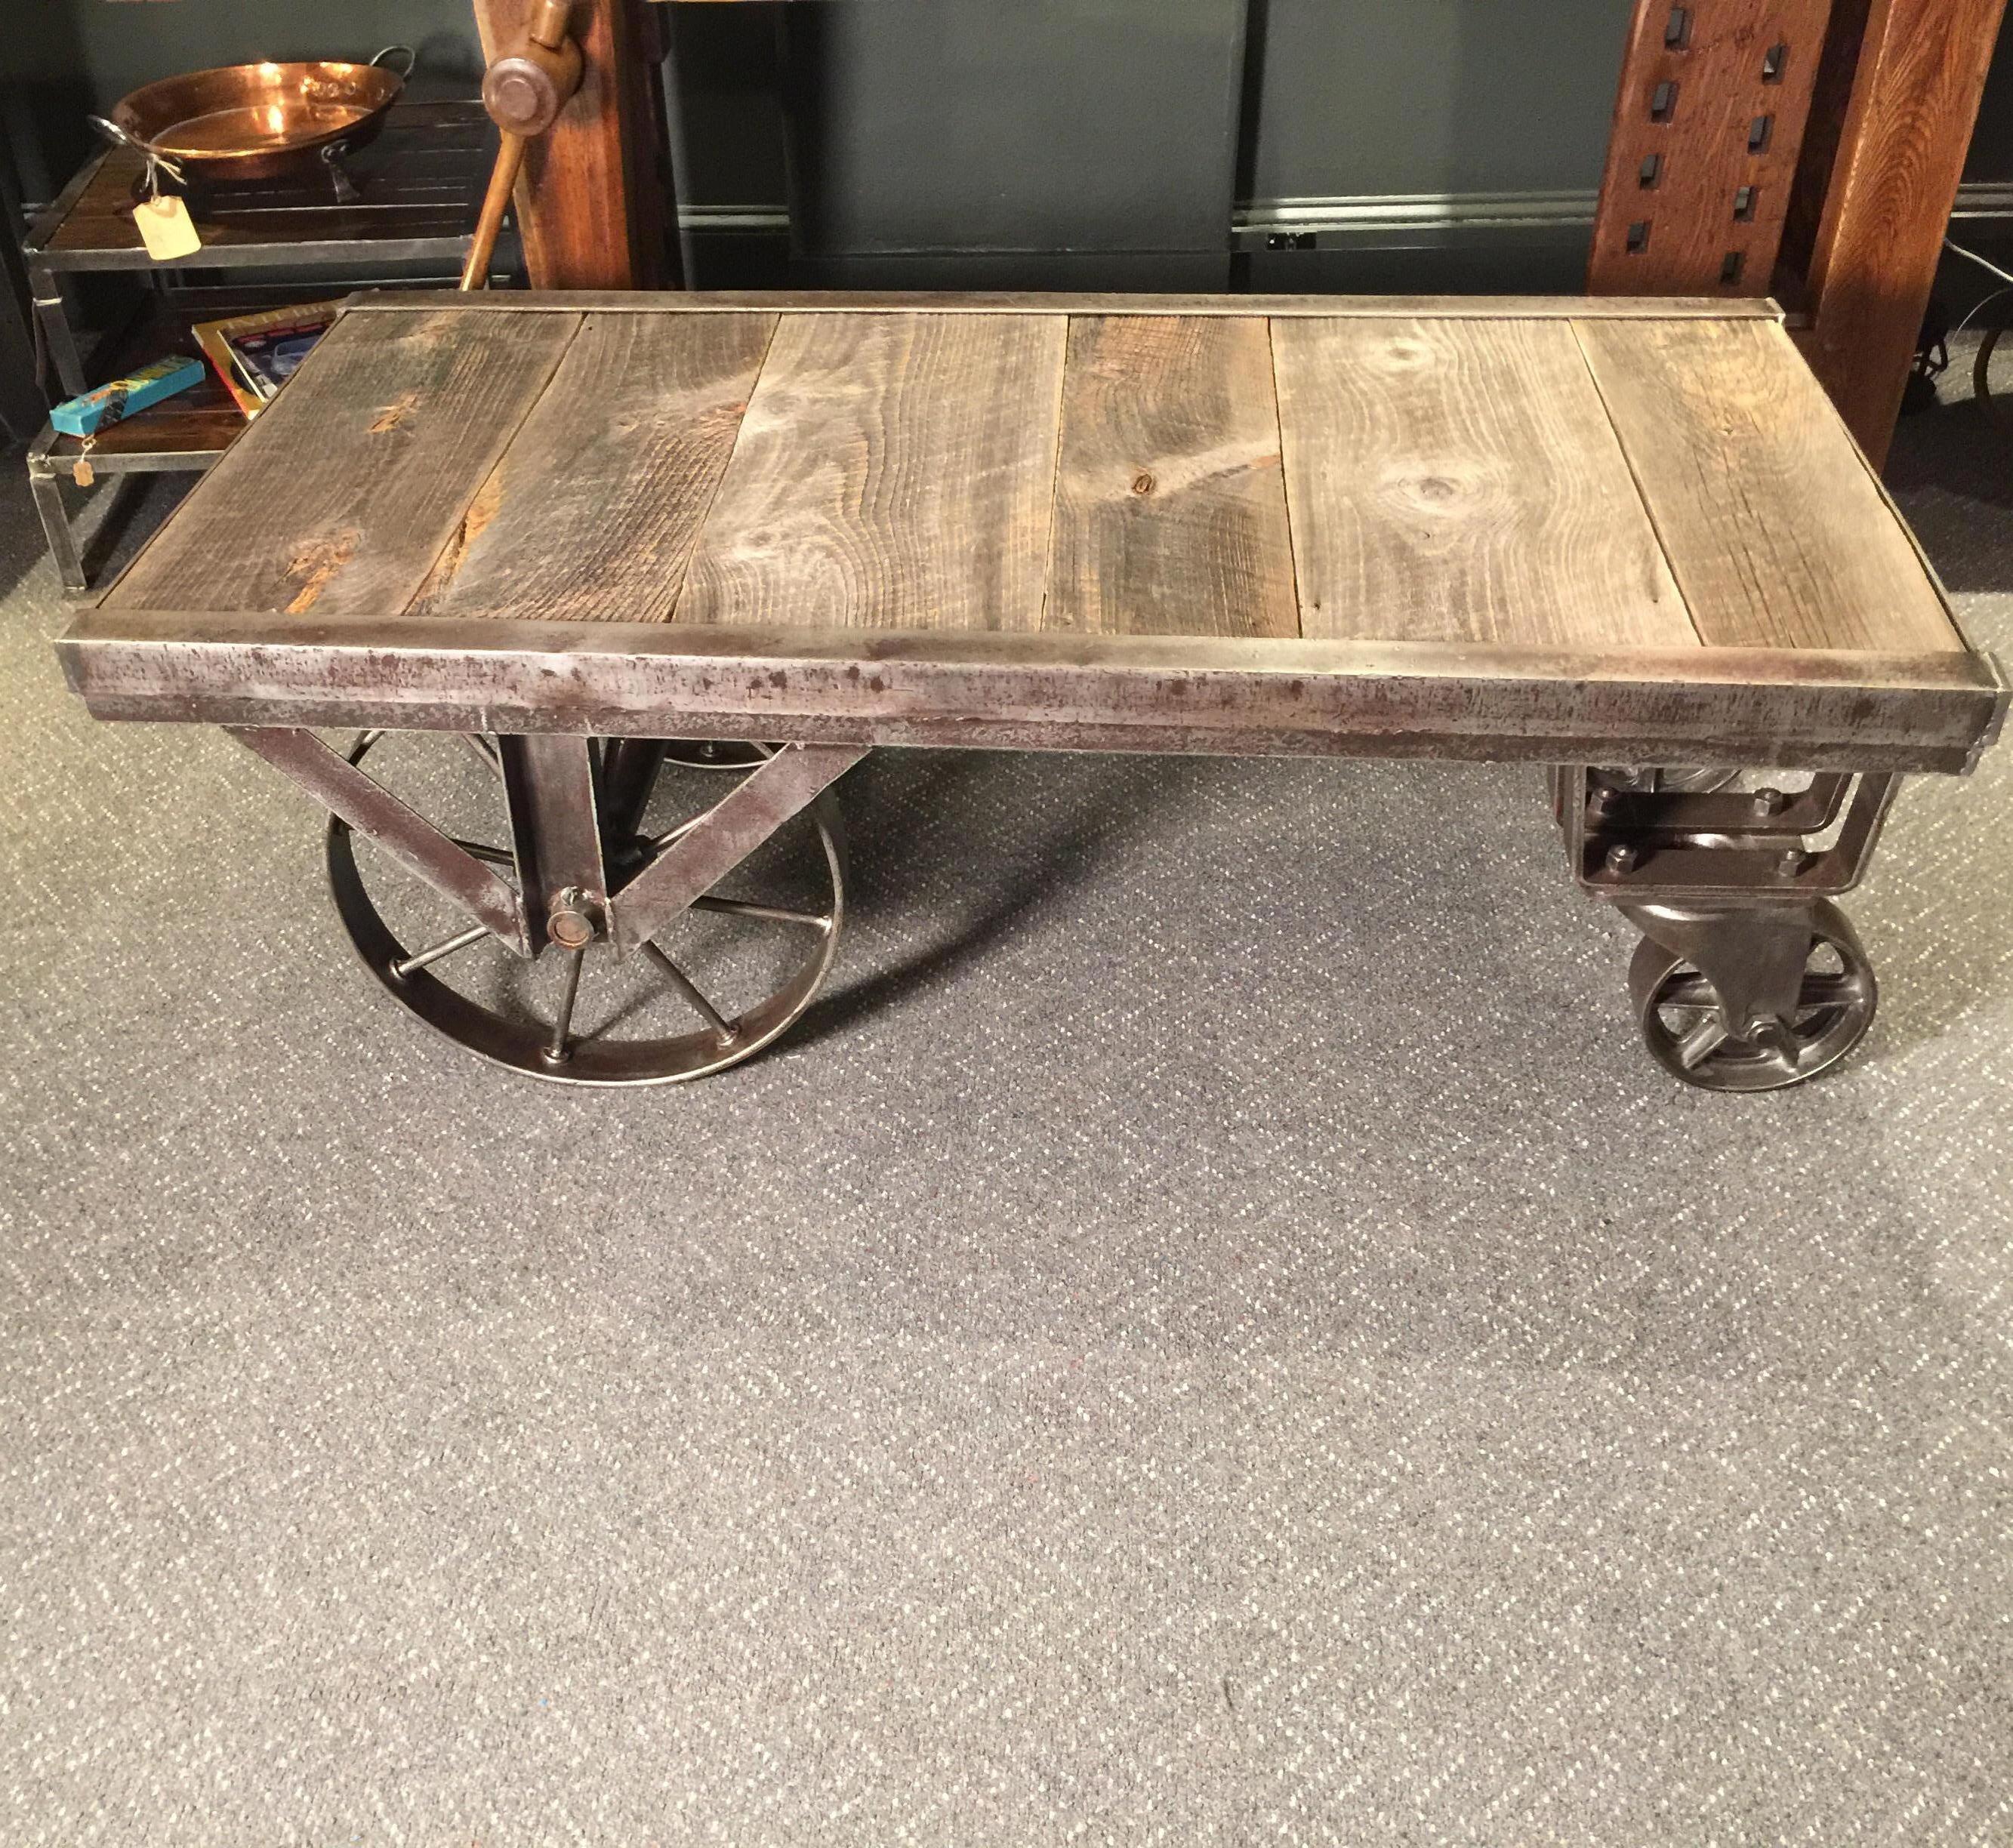 A steel and oak 1930s factory cart that has been fully restored. The steel has been cleaned and polished while still leaving age and patination. The oak had been detailed and much of the original character of the wood preserved. Amazing original